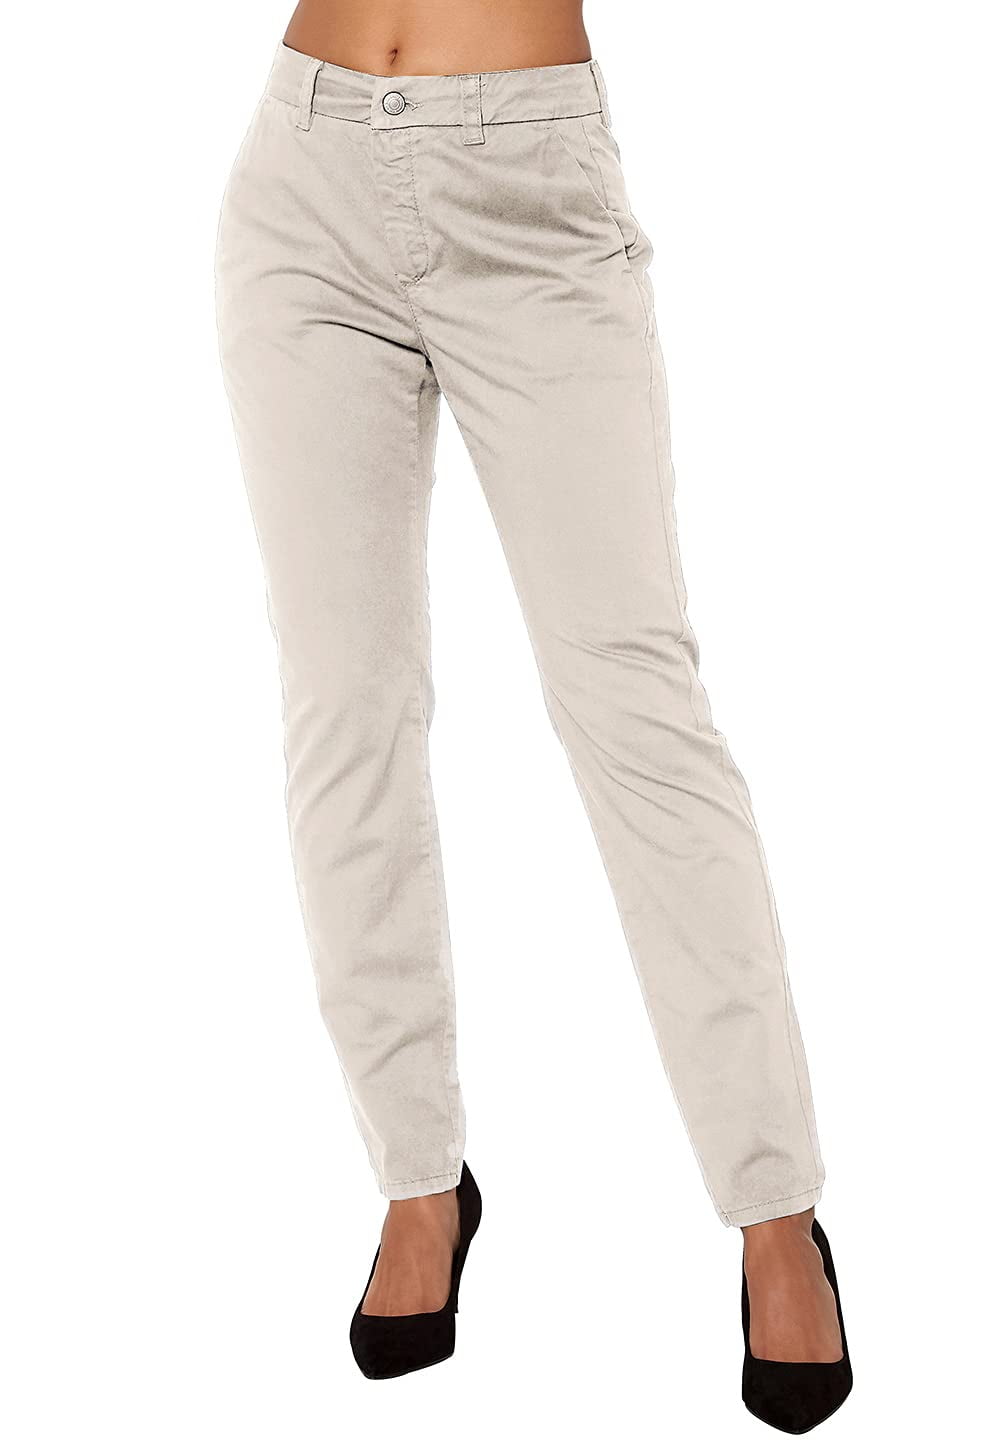 Sherrylily Womens Mid-Rise Stretch Twill Chino Pants Casual Work Pants 